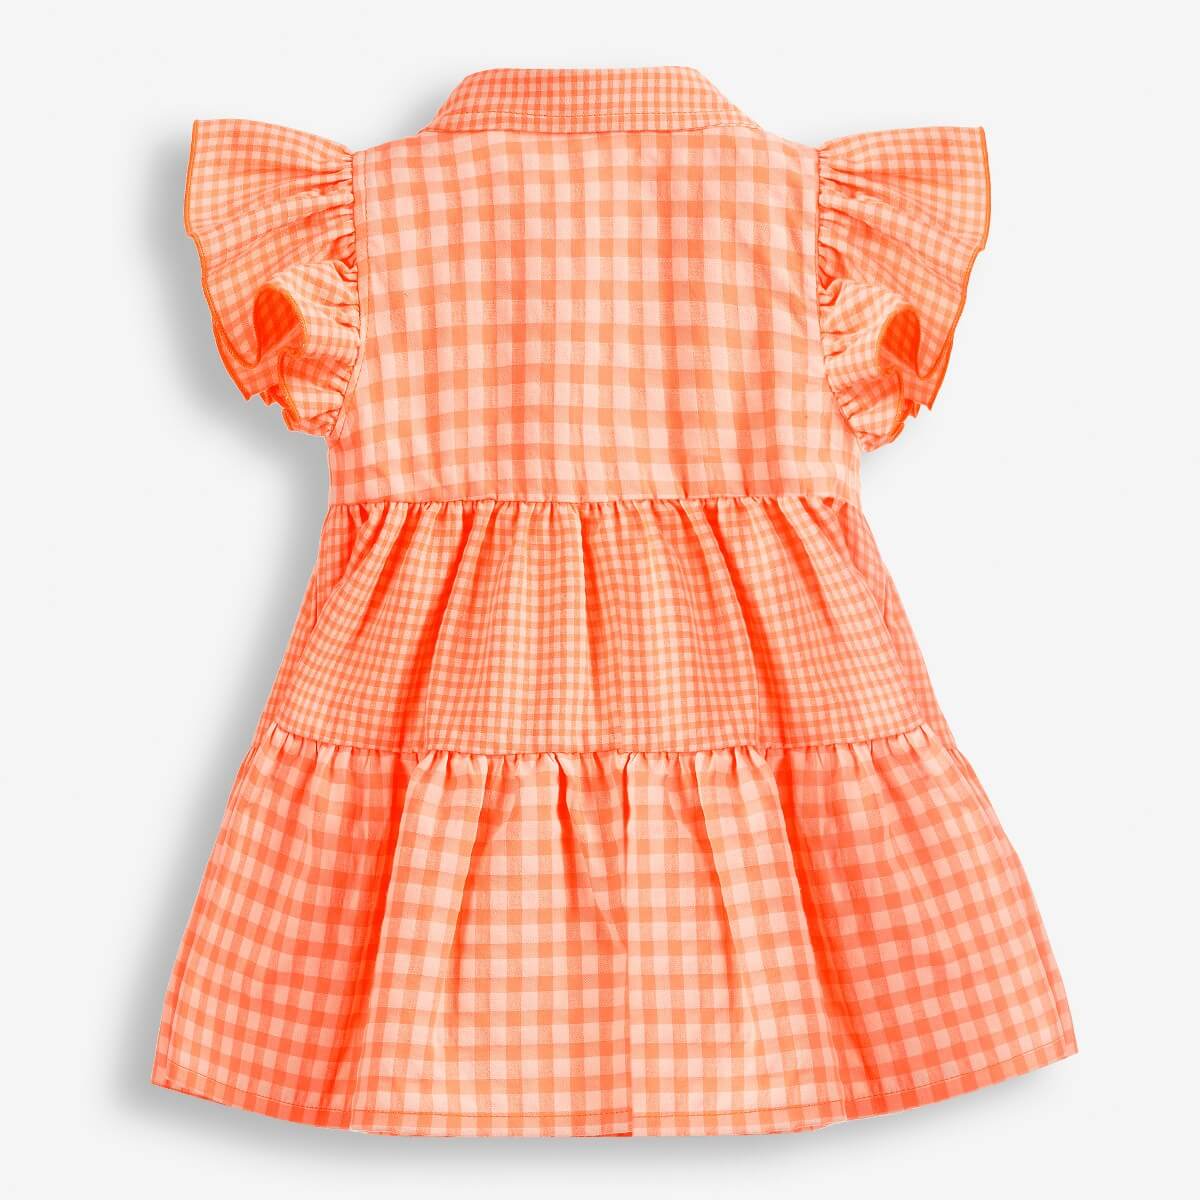 Baby Girls' Checkered Dress with Ruffles on the Shoulders